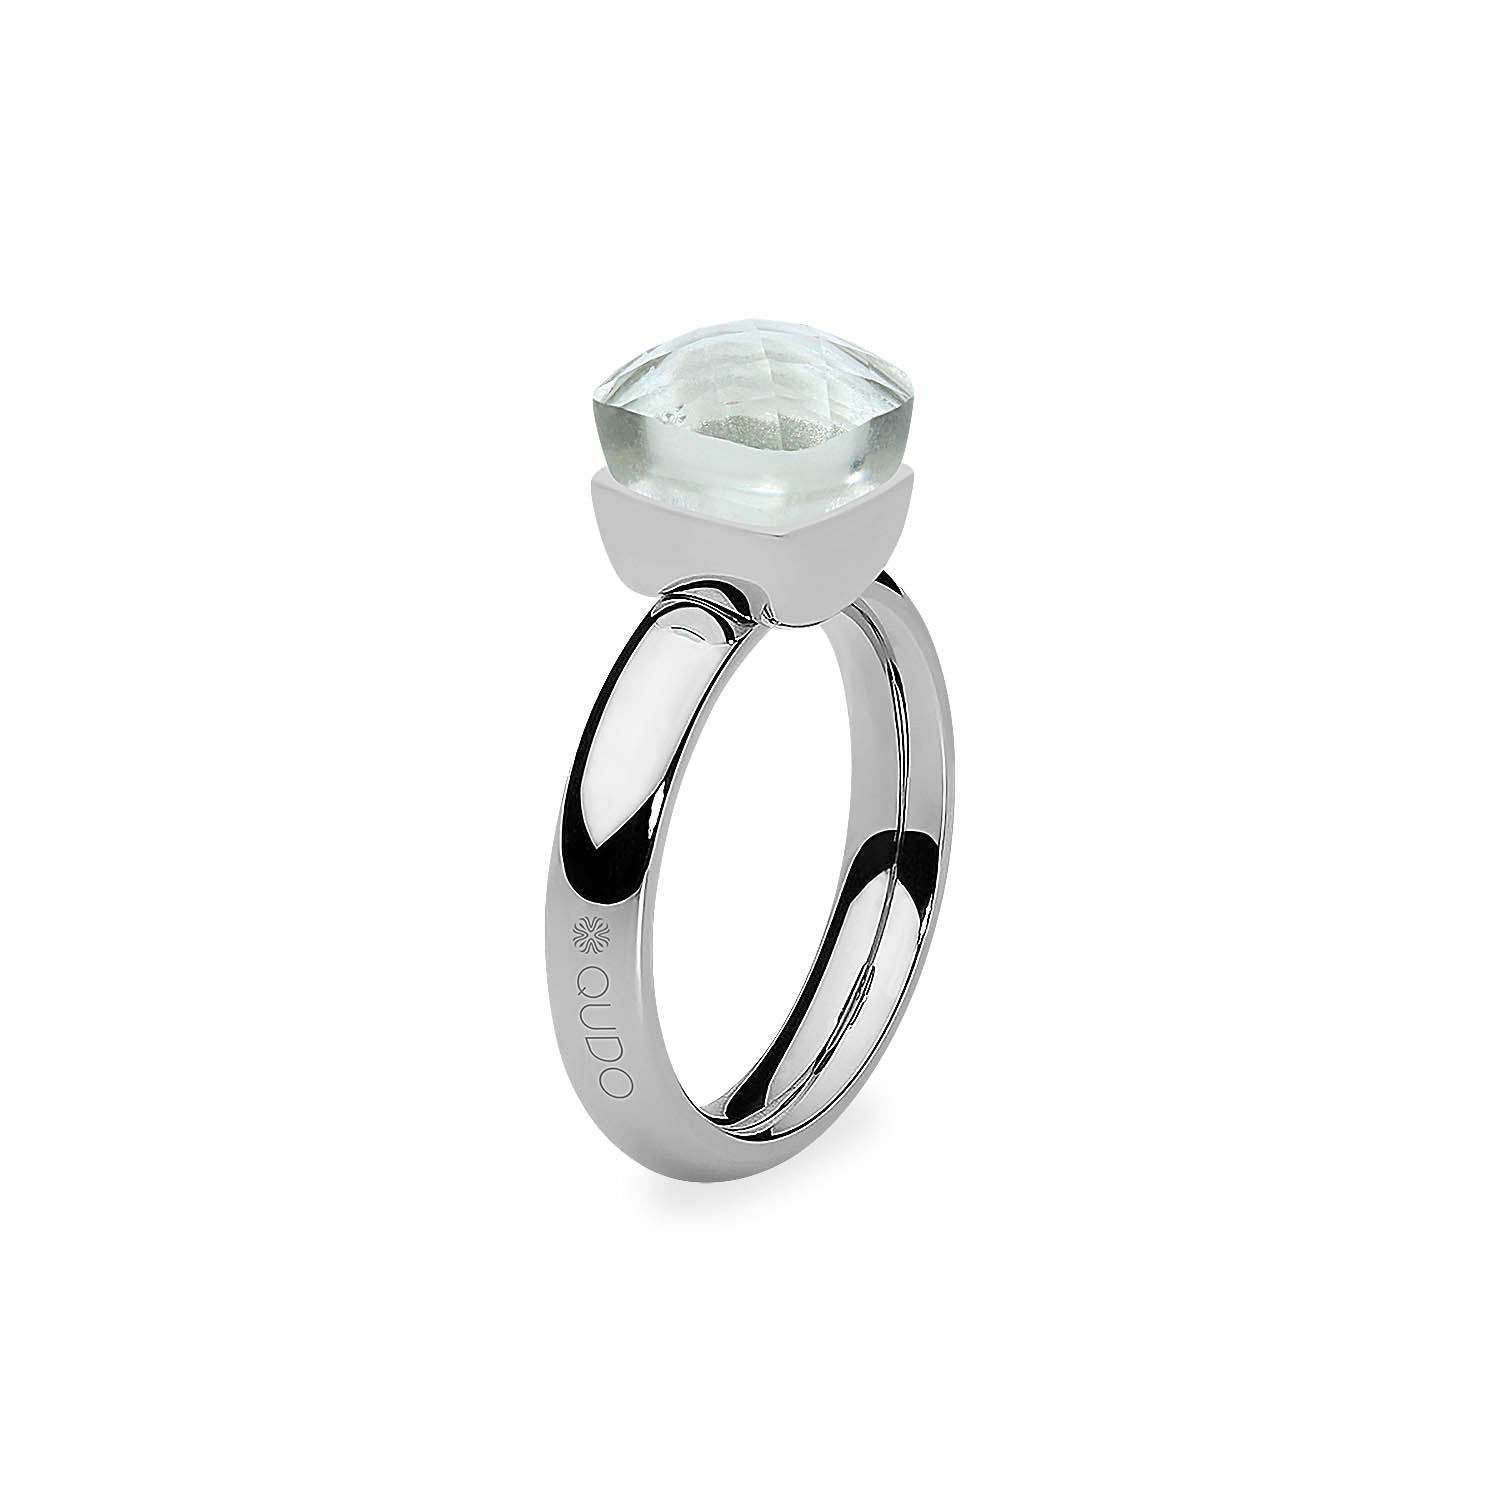 Firenze Ring - Shades of Rose & Grey - Silber